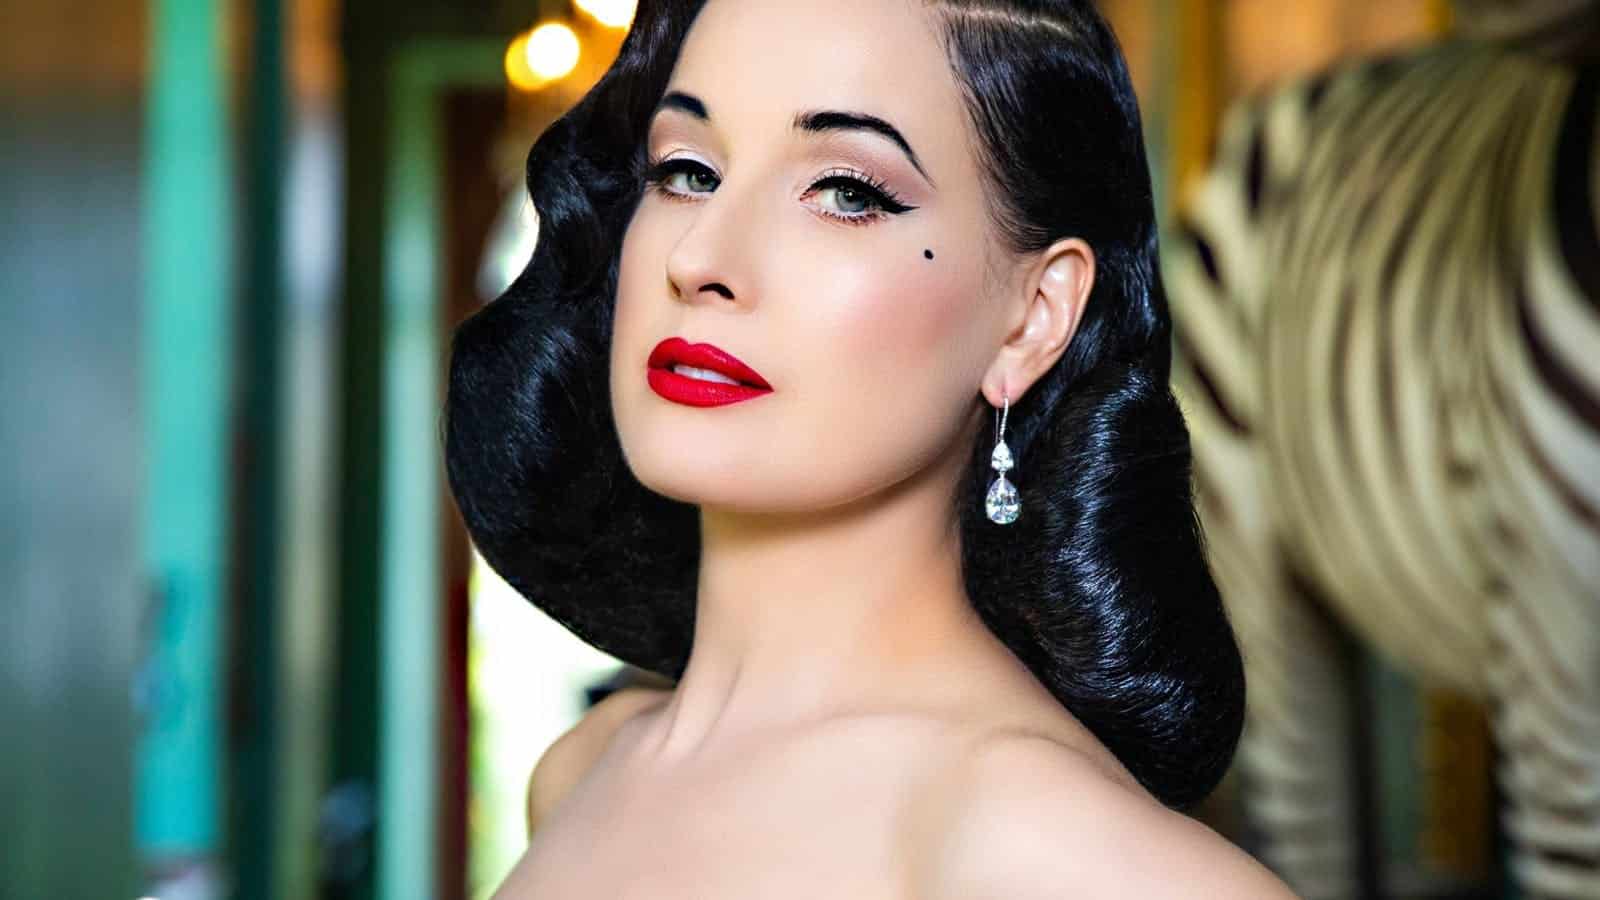 MARILYN MANSON’s Ex-Wife DITA VON TEESE Releases Statement About Recent Abuse Allegations